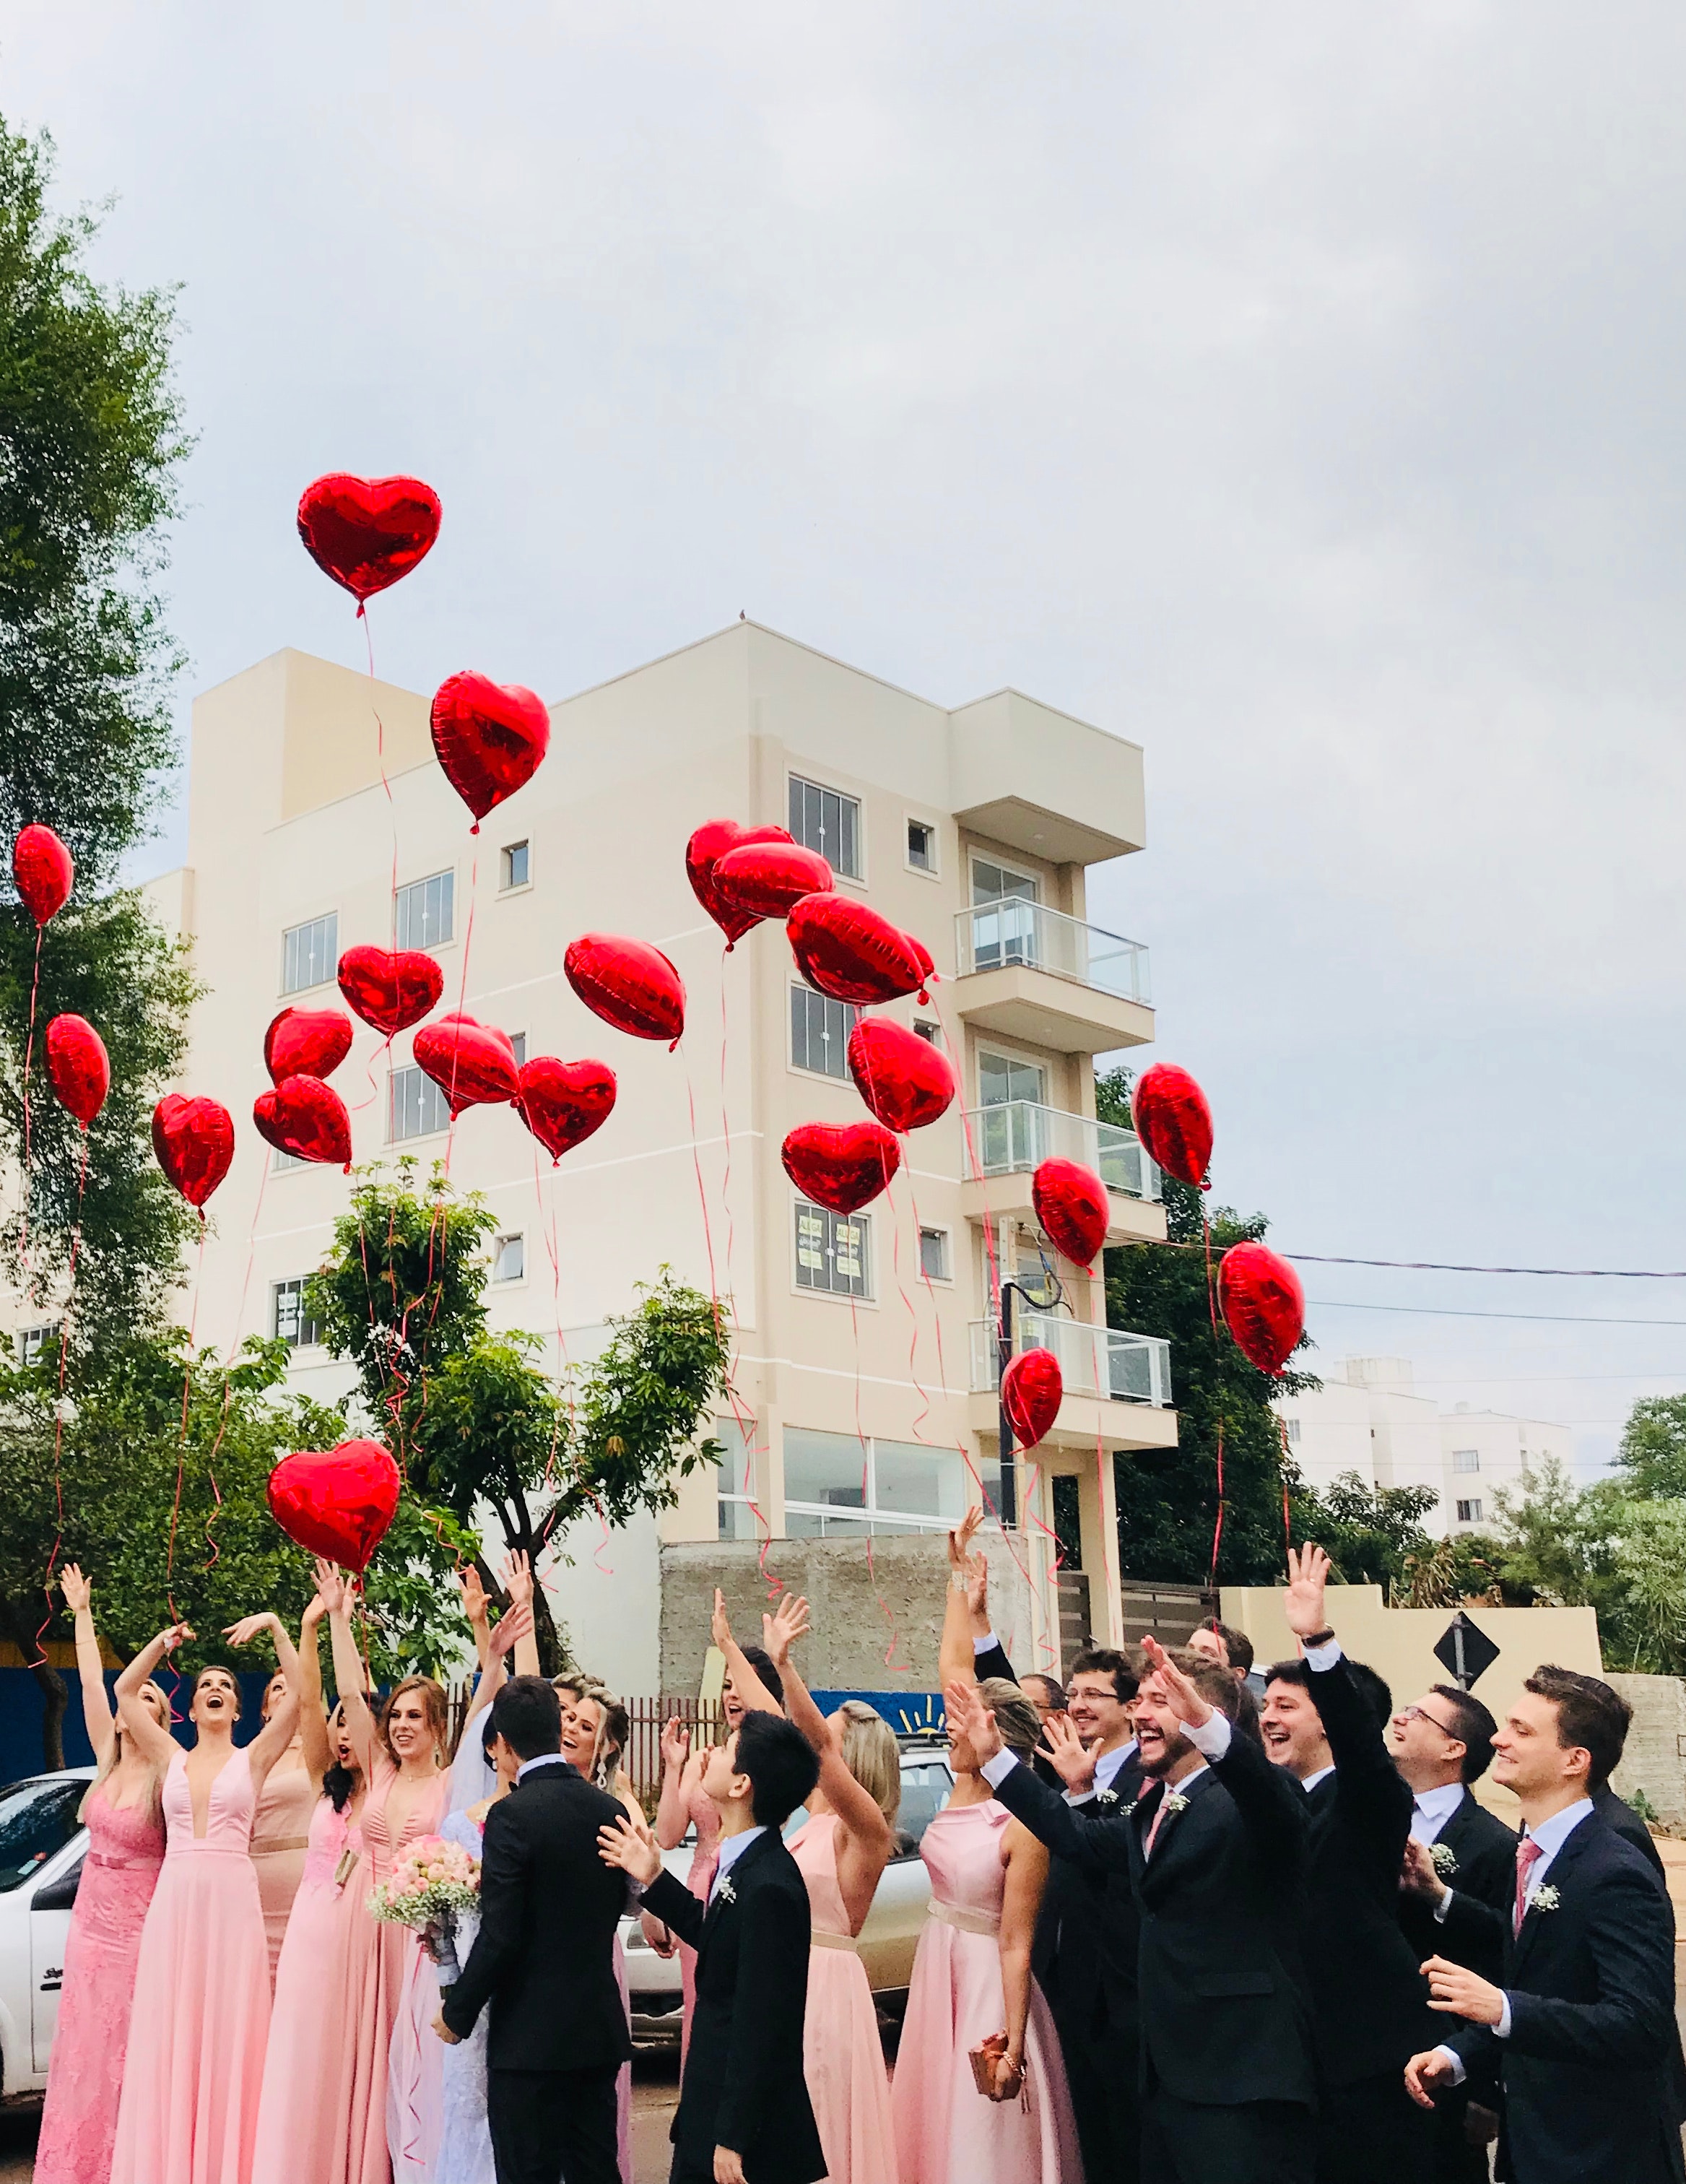 Women wearing pink dresses and men wearing black suit jacket and pants raising hands with red heart balloons photo